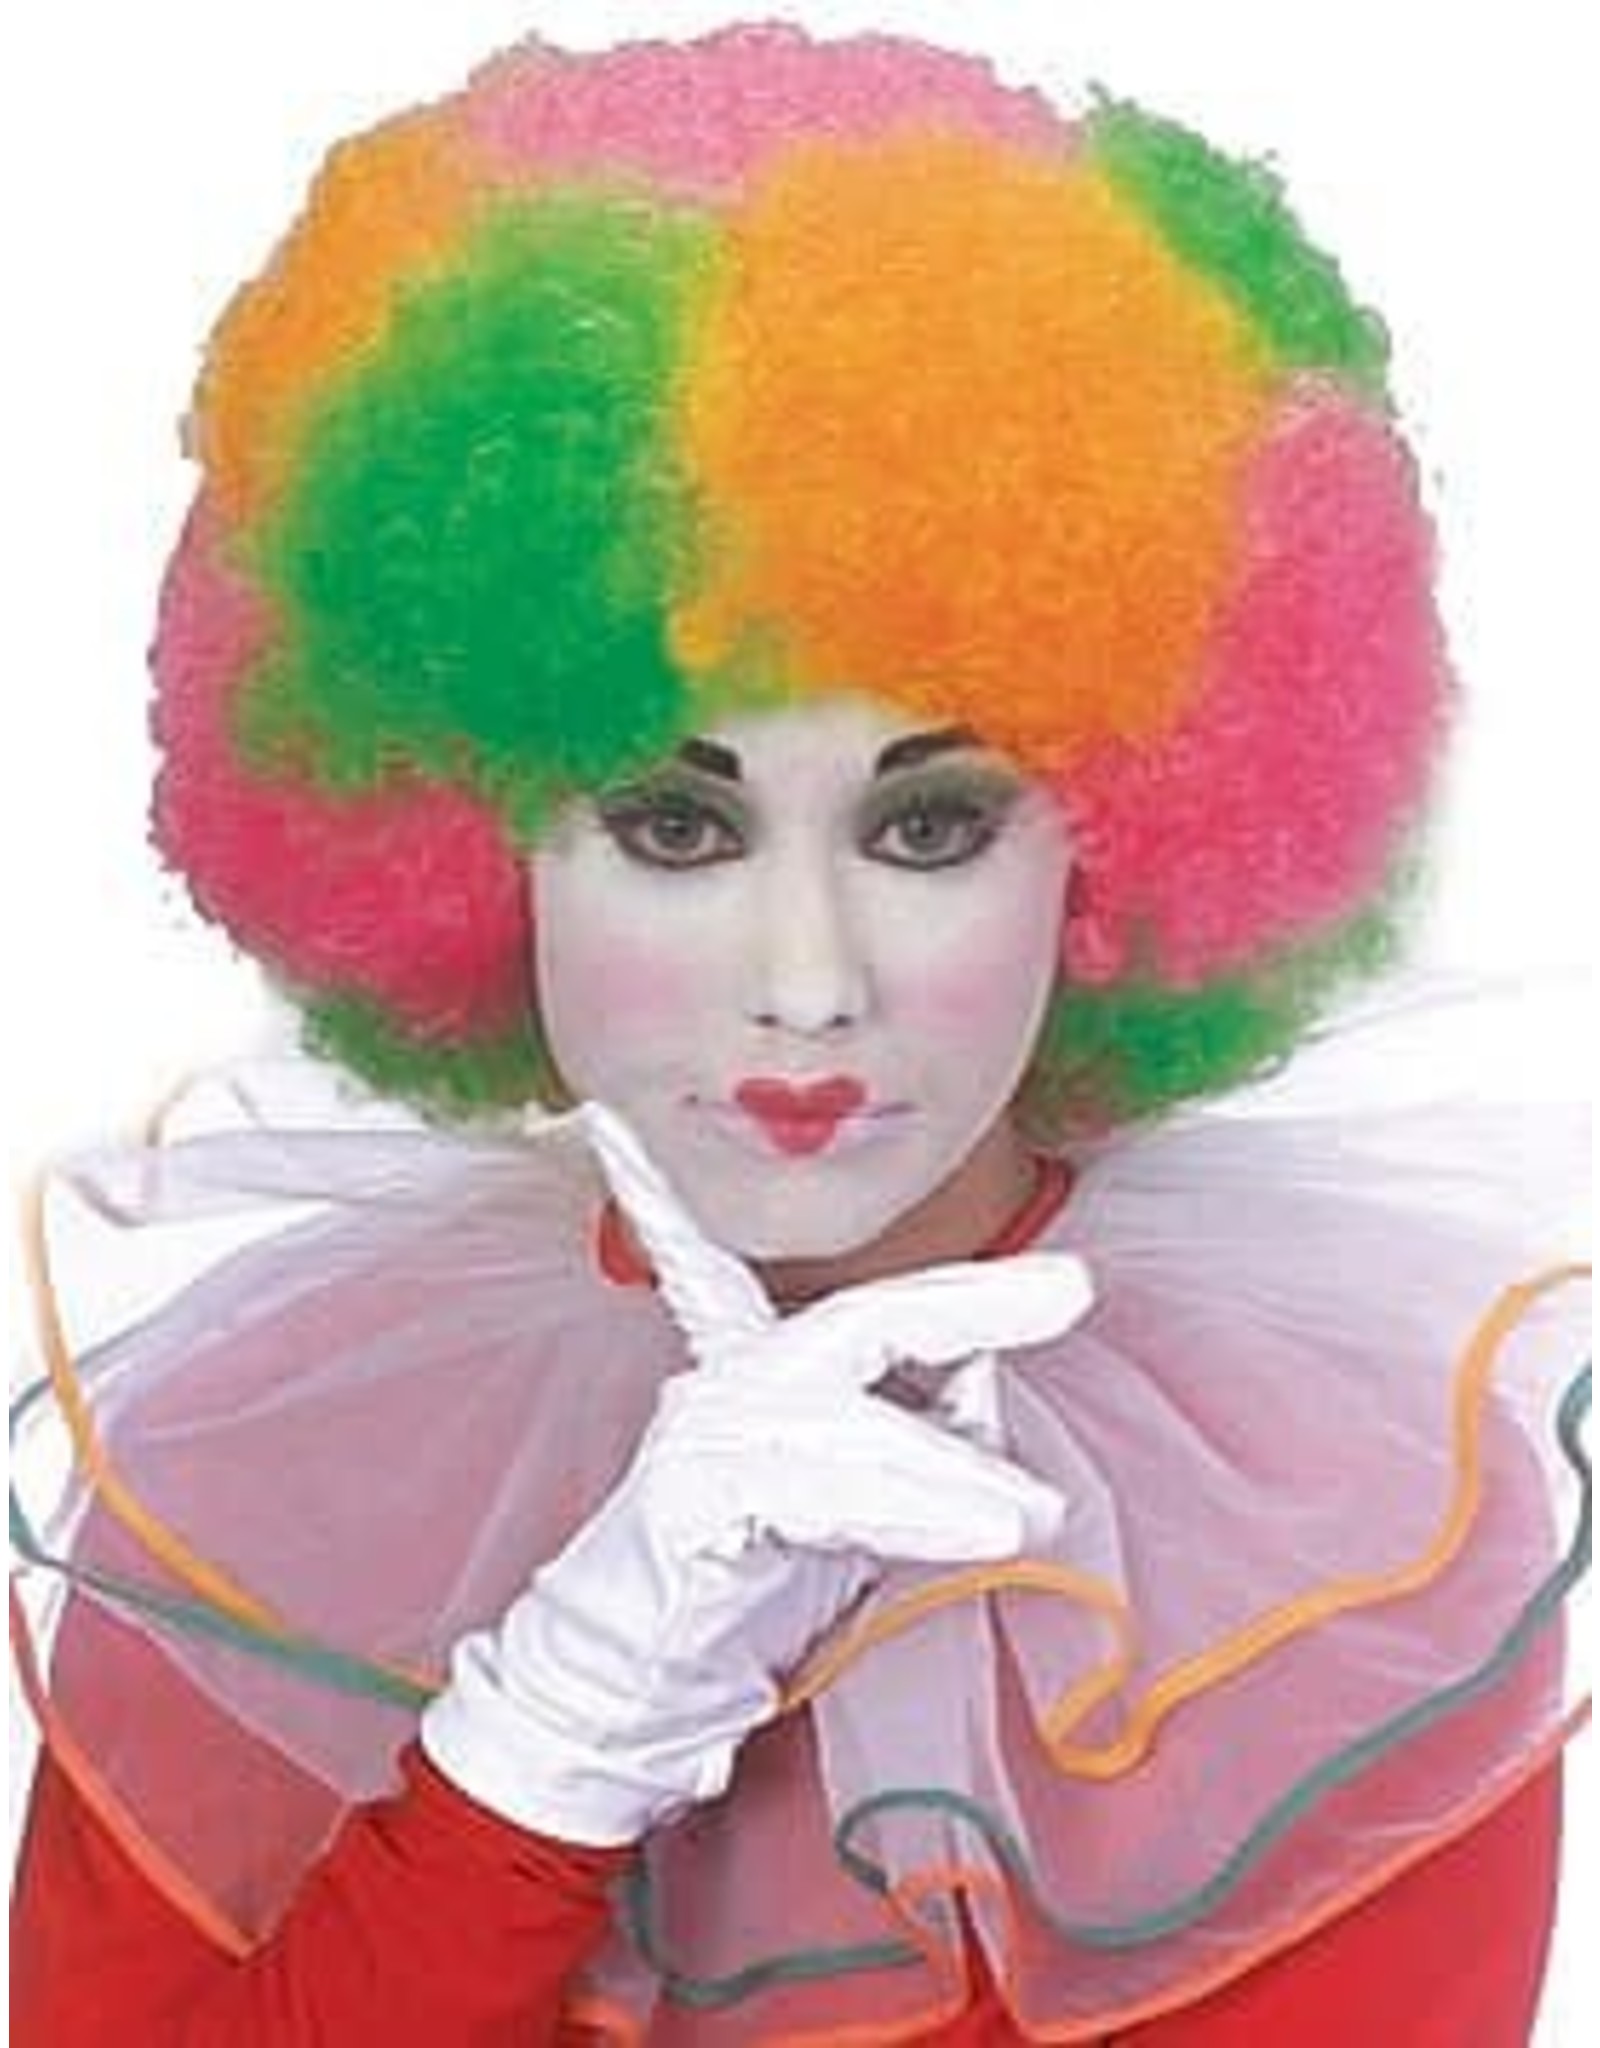 Rubies Costume *Discontinued* Multi-Color Clown Wig